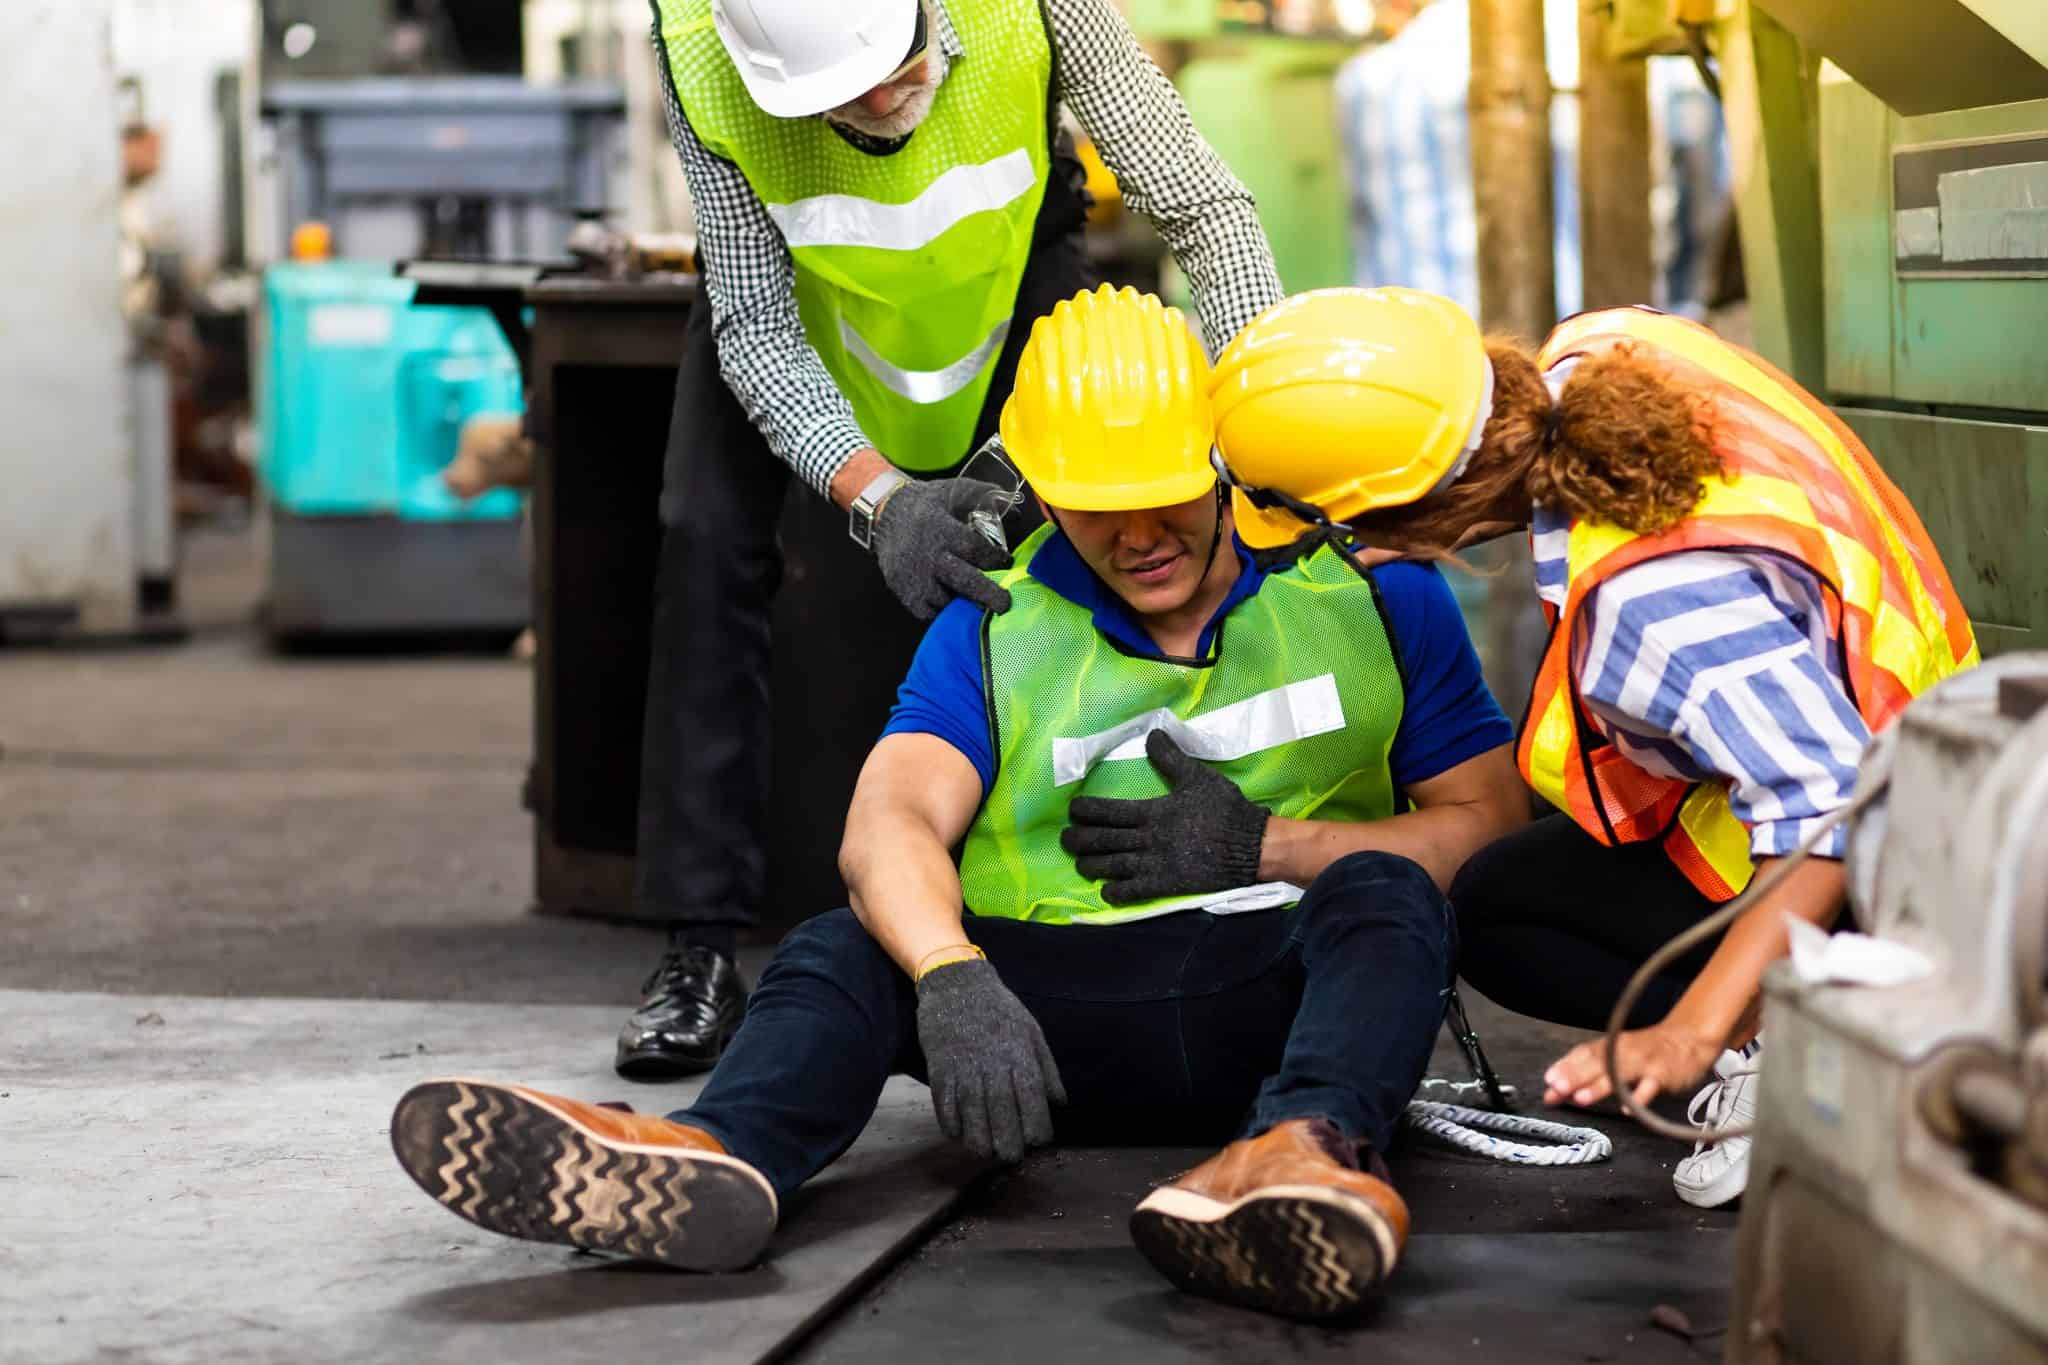 Injured at work. First steps to take to claim WorkCover compensation